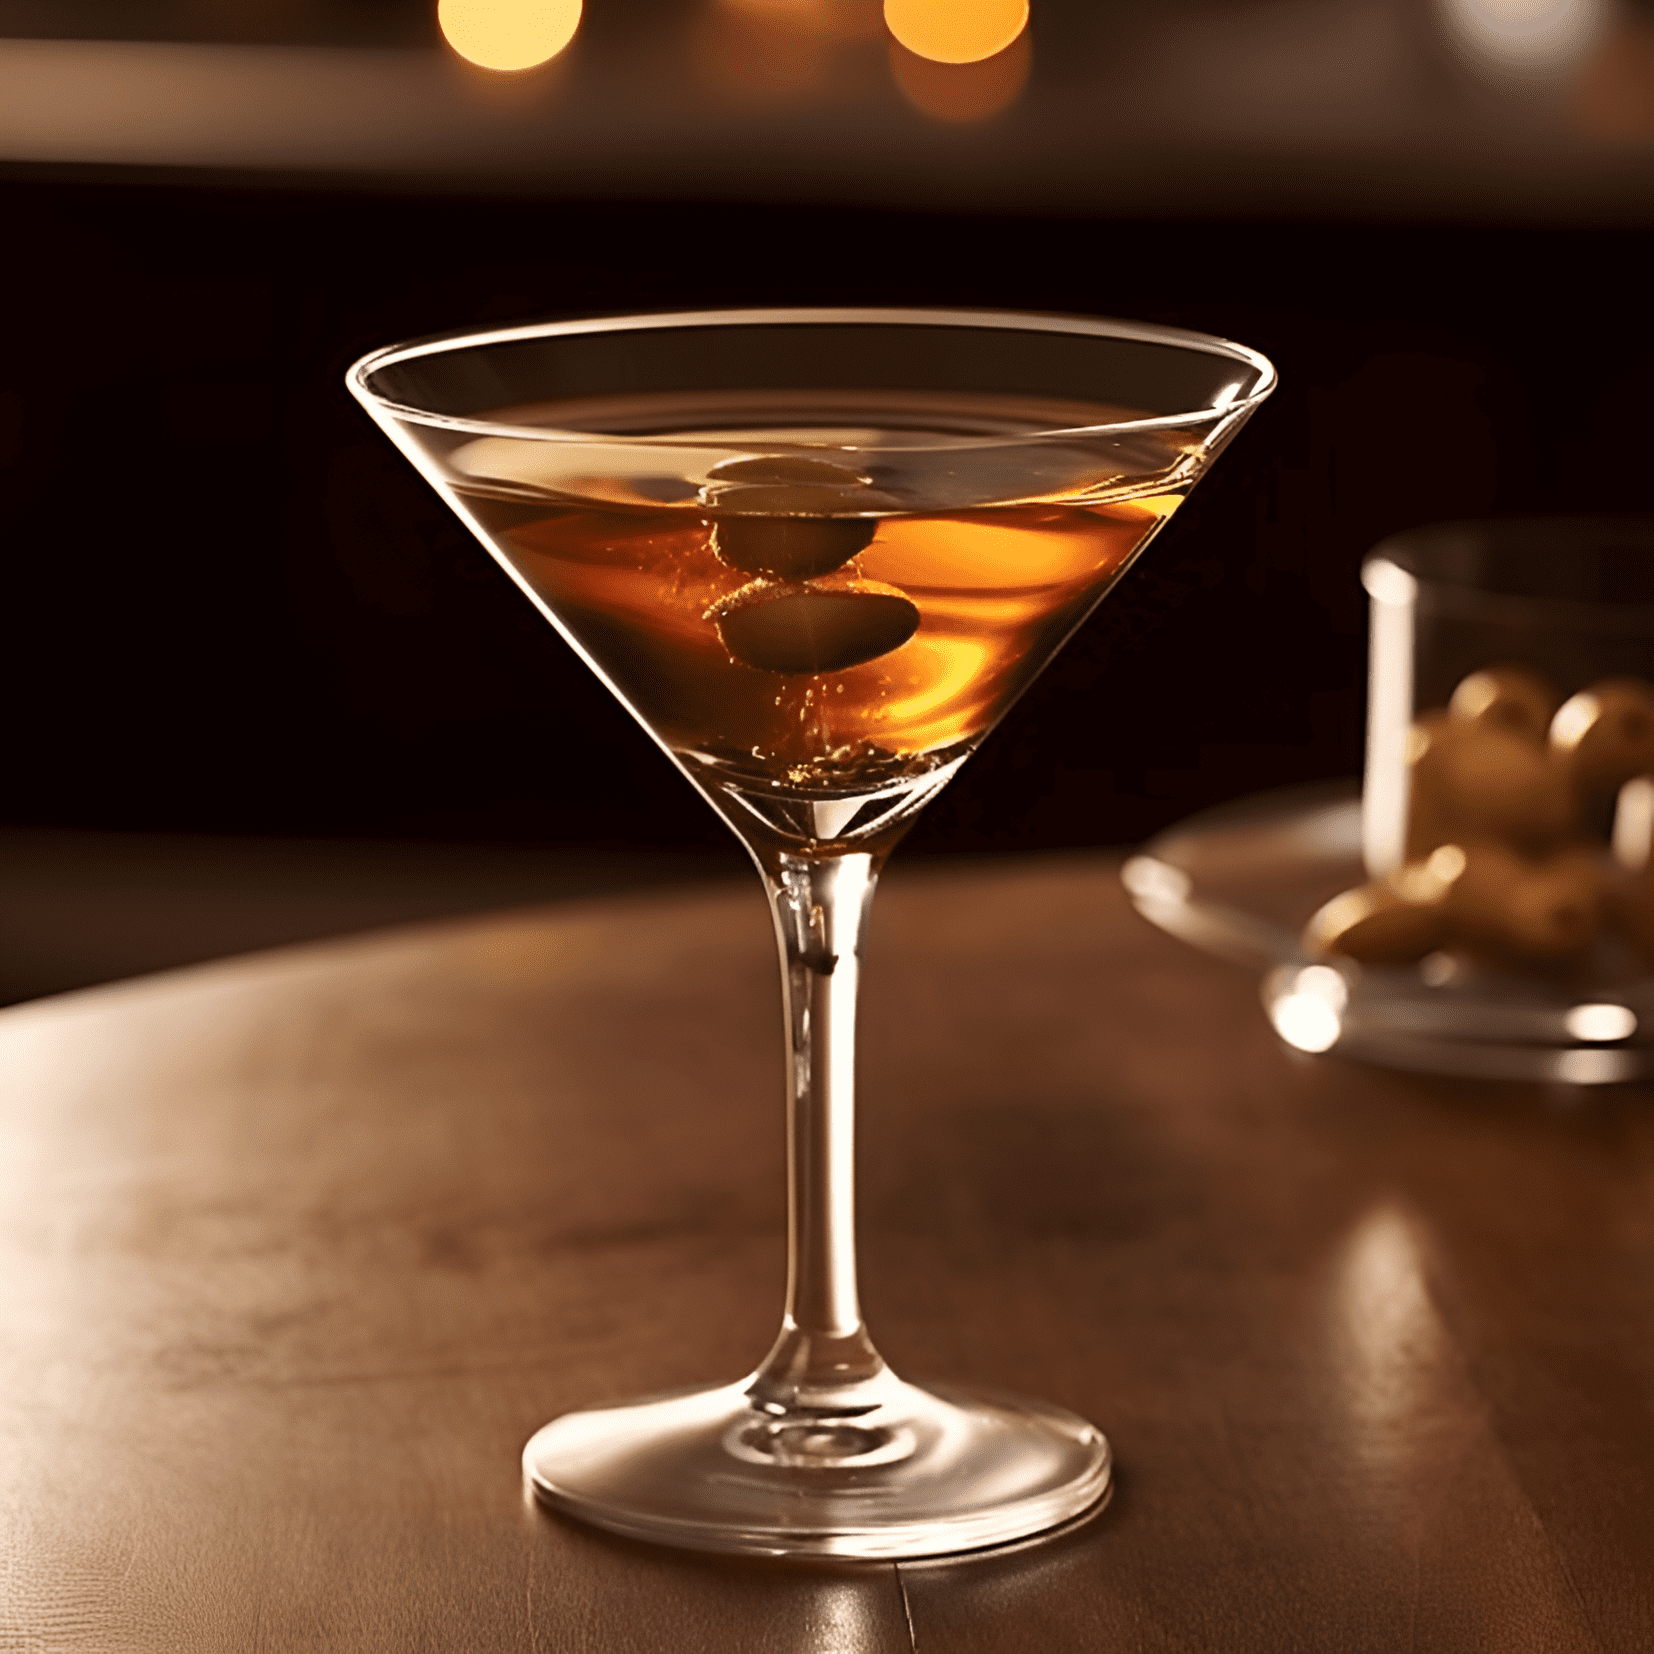 Smokey Martini Cocktail Recipe - The Smokey Martini has a bold, complex flavor profile, with a perfect balance of smoky, savory, and slightly bitter notes. The smokiness from the Scotch whisky is the star of the show, while the dry vermouth adds a subtle herbal undertone. The olive brine brings a touch of saltiness, enhancing the overall depth and richness of the cocktail.